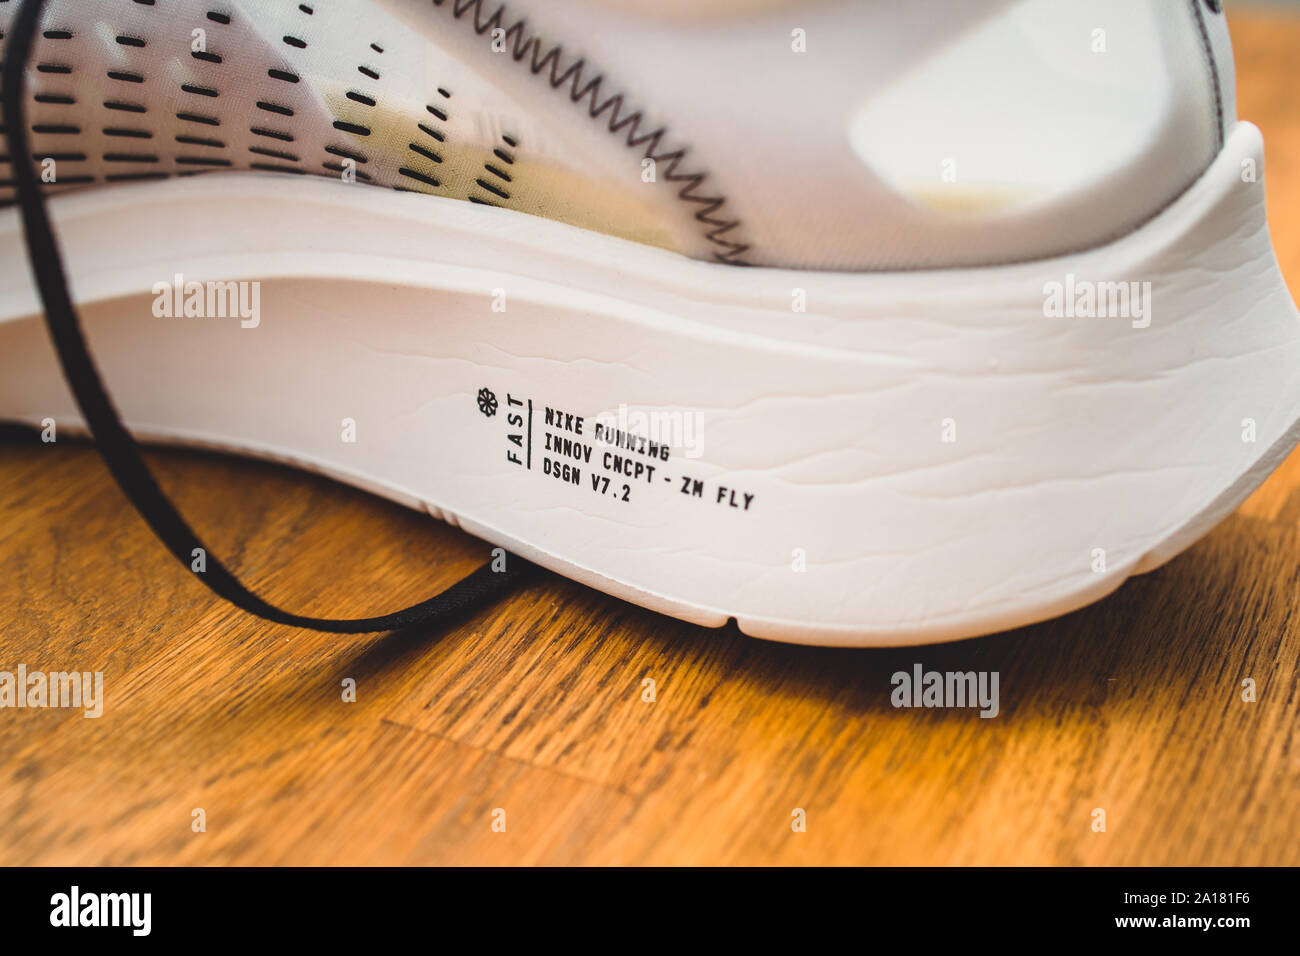 Paris, France - Jul 8, 2019: close-up macro shot of new professional Nike  running sport shoe on wooden floor Nike Zoom Fly SP FInnovation concept  DSGN V7.2 Stock Photo - Alamy